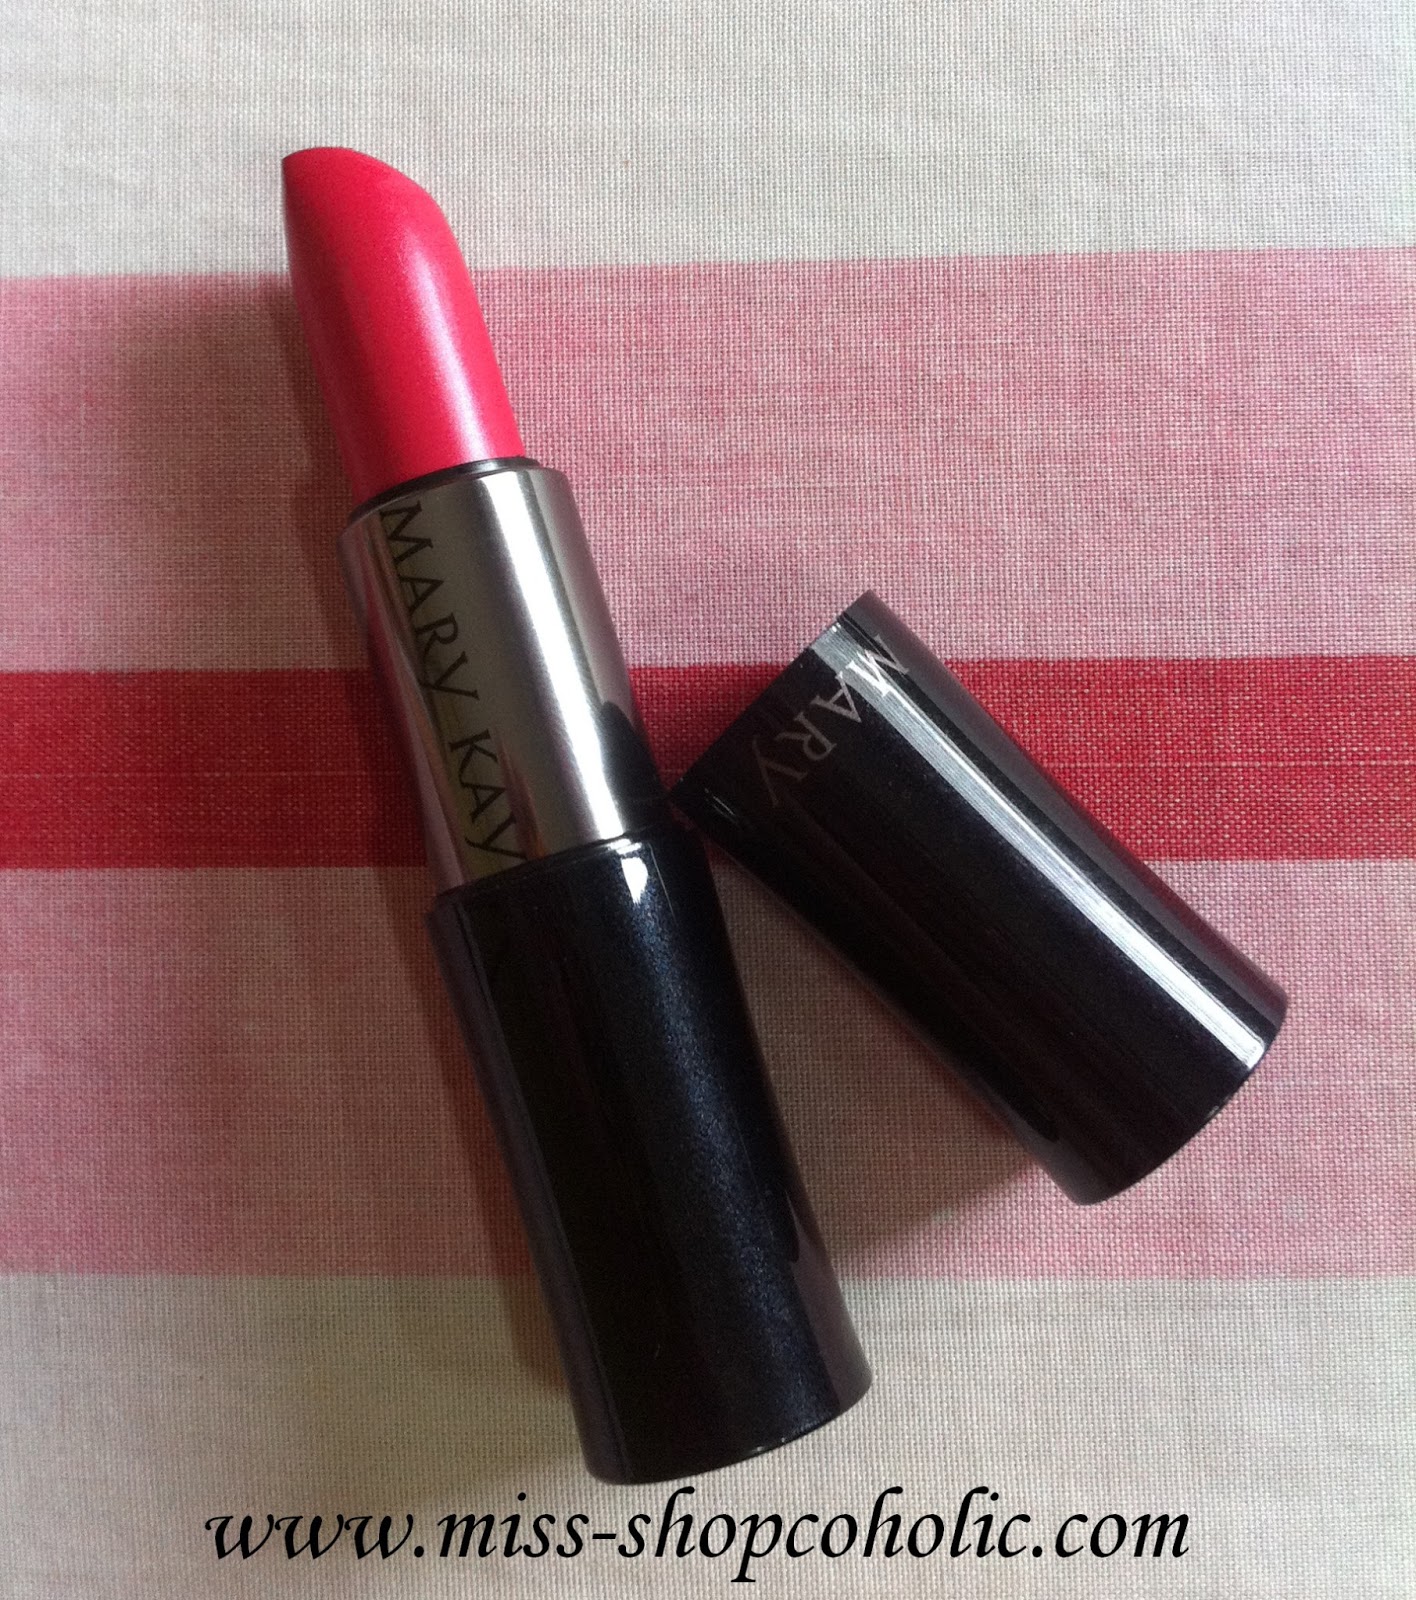 Swatch: Mary Kay Creme Lipstick in Pink Melon | Miss